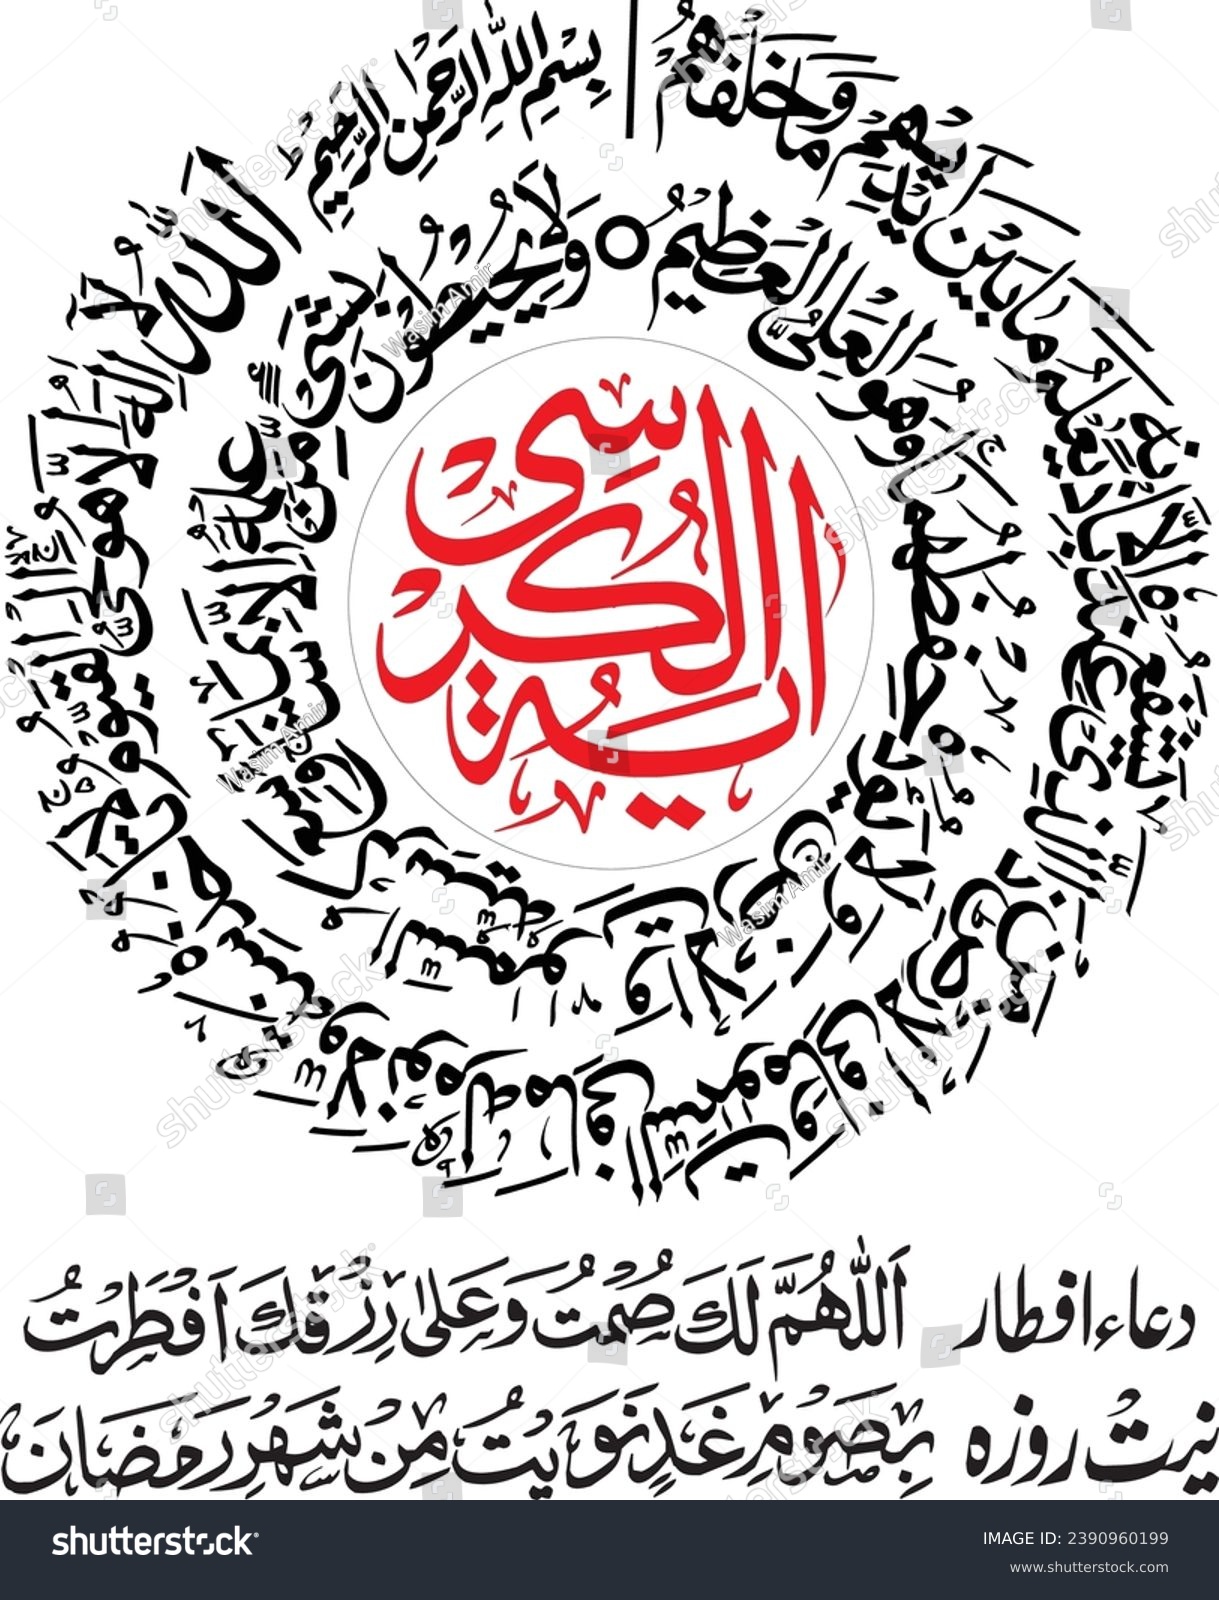 SVG of Ayat ul Kursi is a Quranic Verse. It is a shield from sins. svg